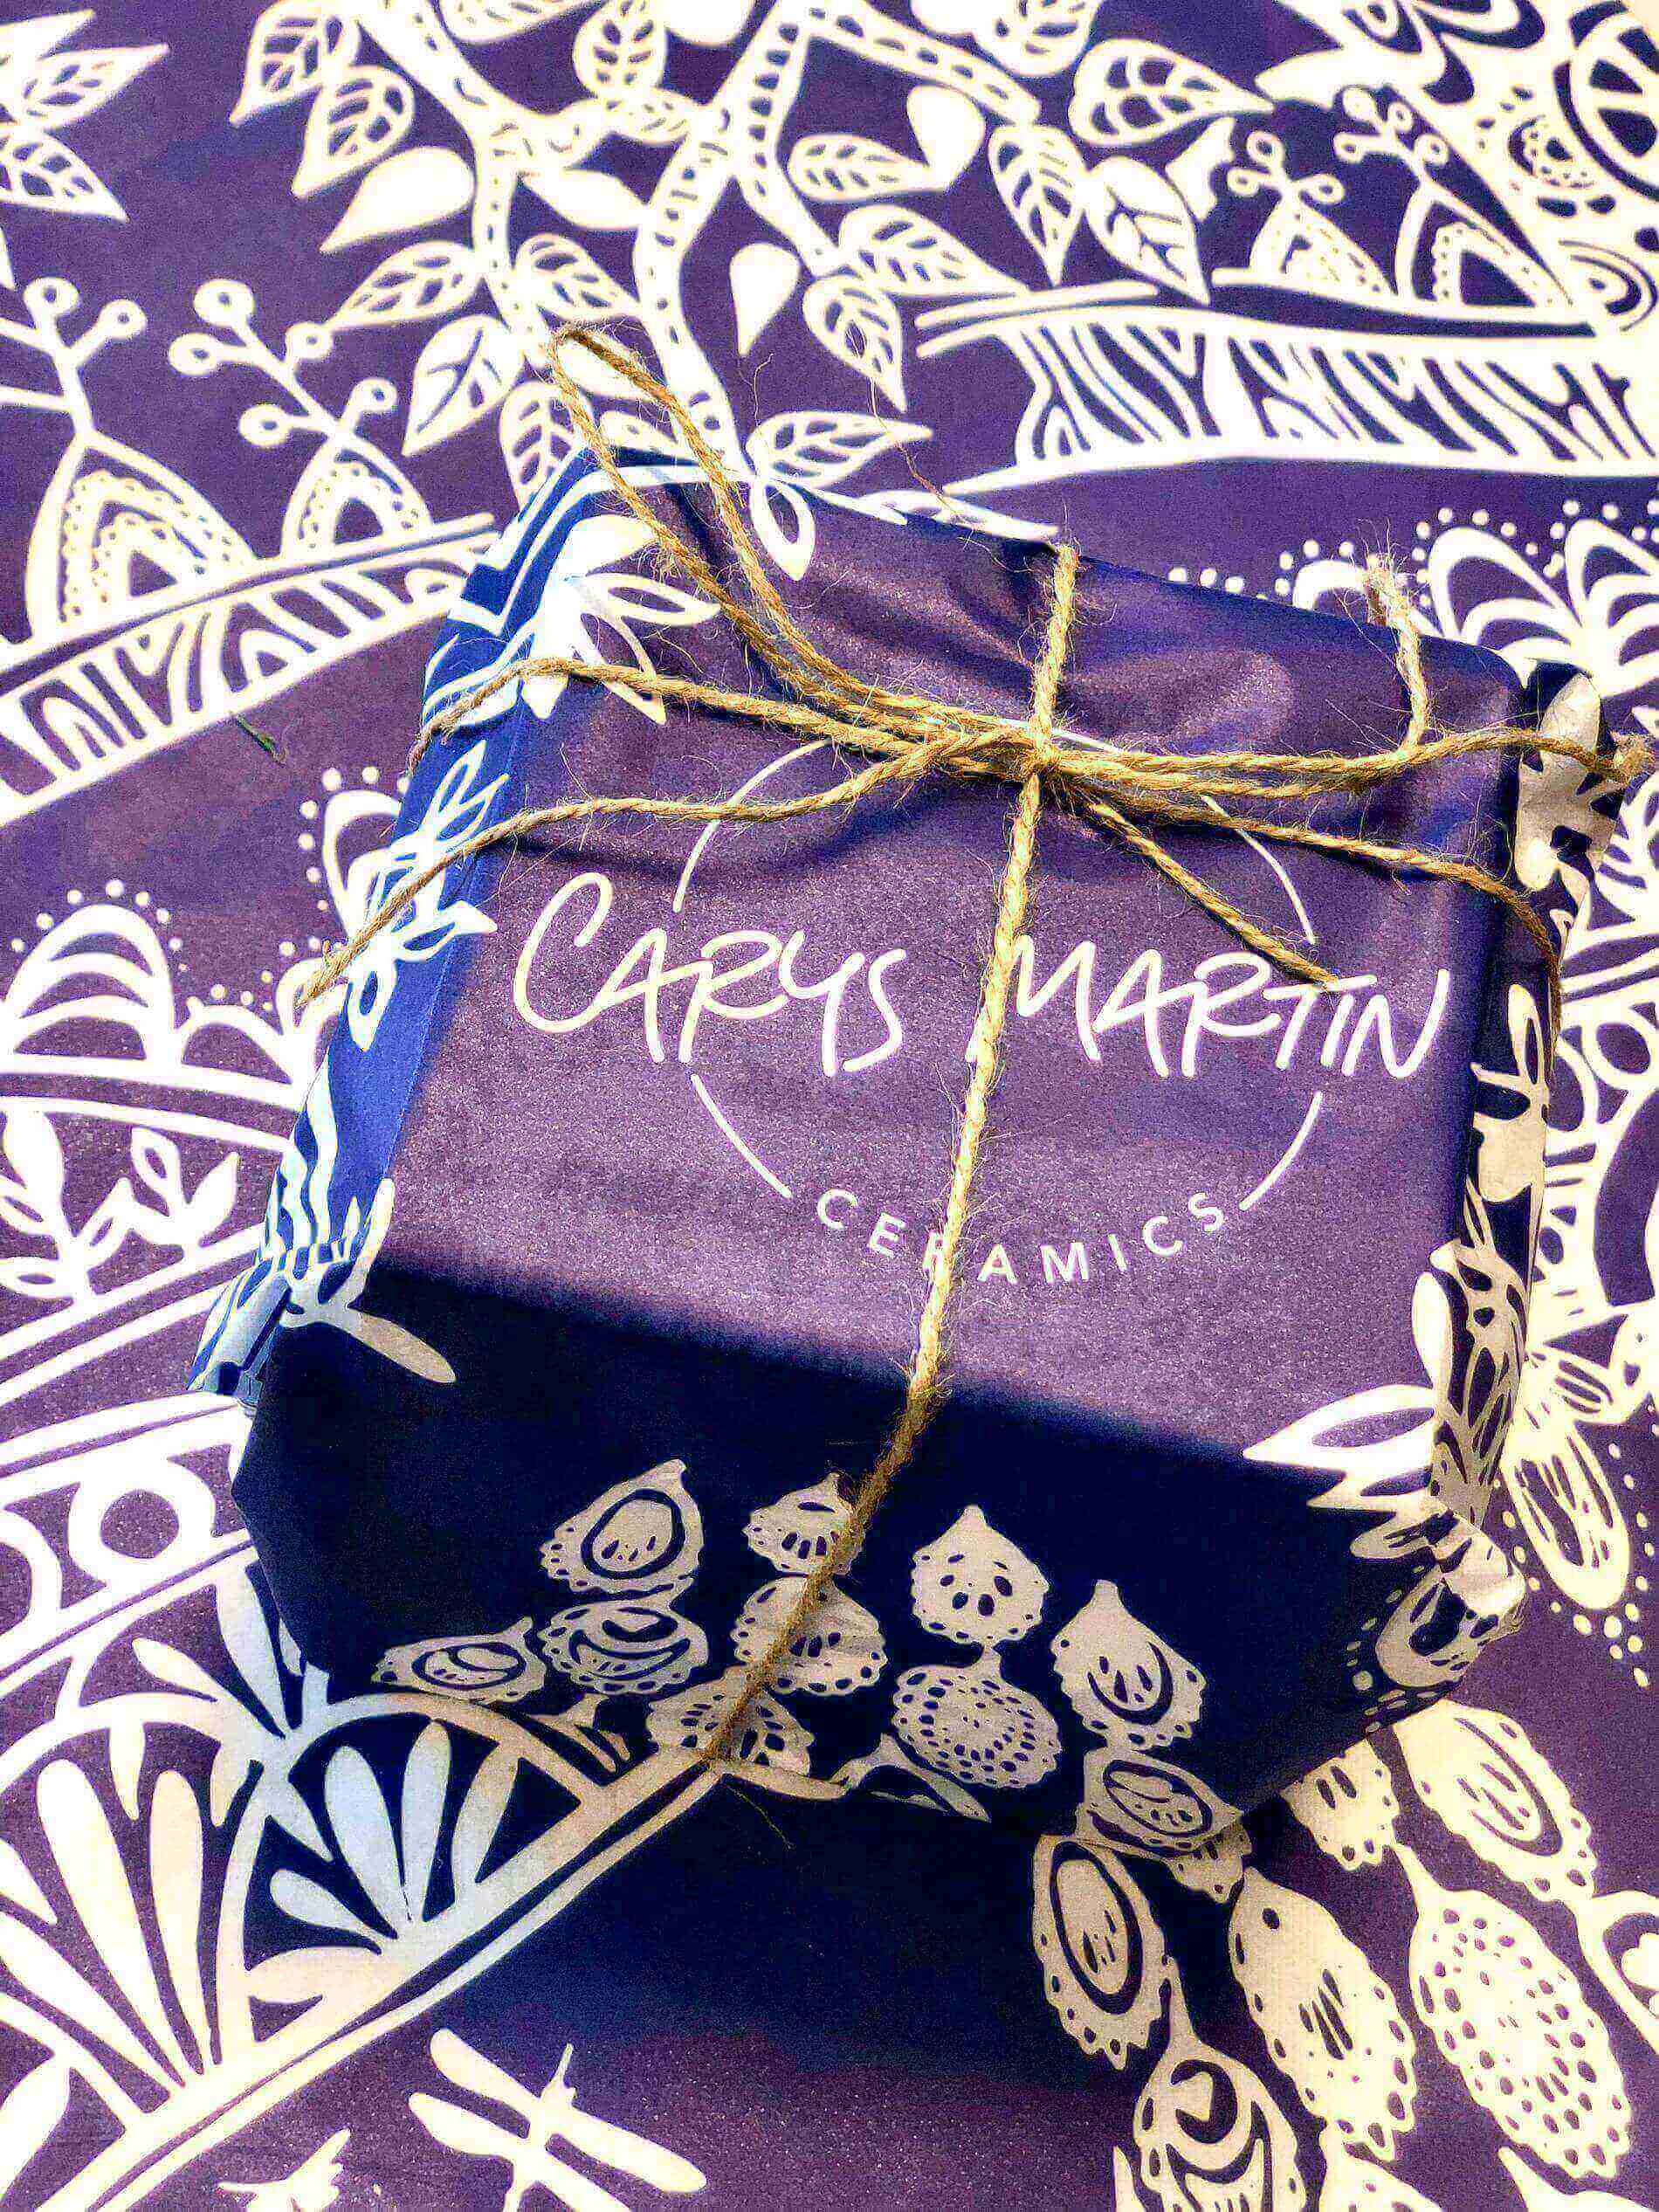 Package wrapped up in Carys Martin Ceramics branded tissue paper